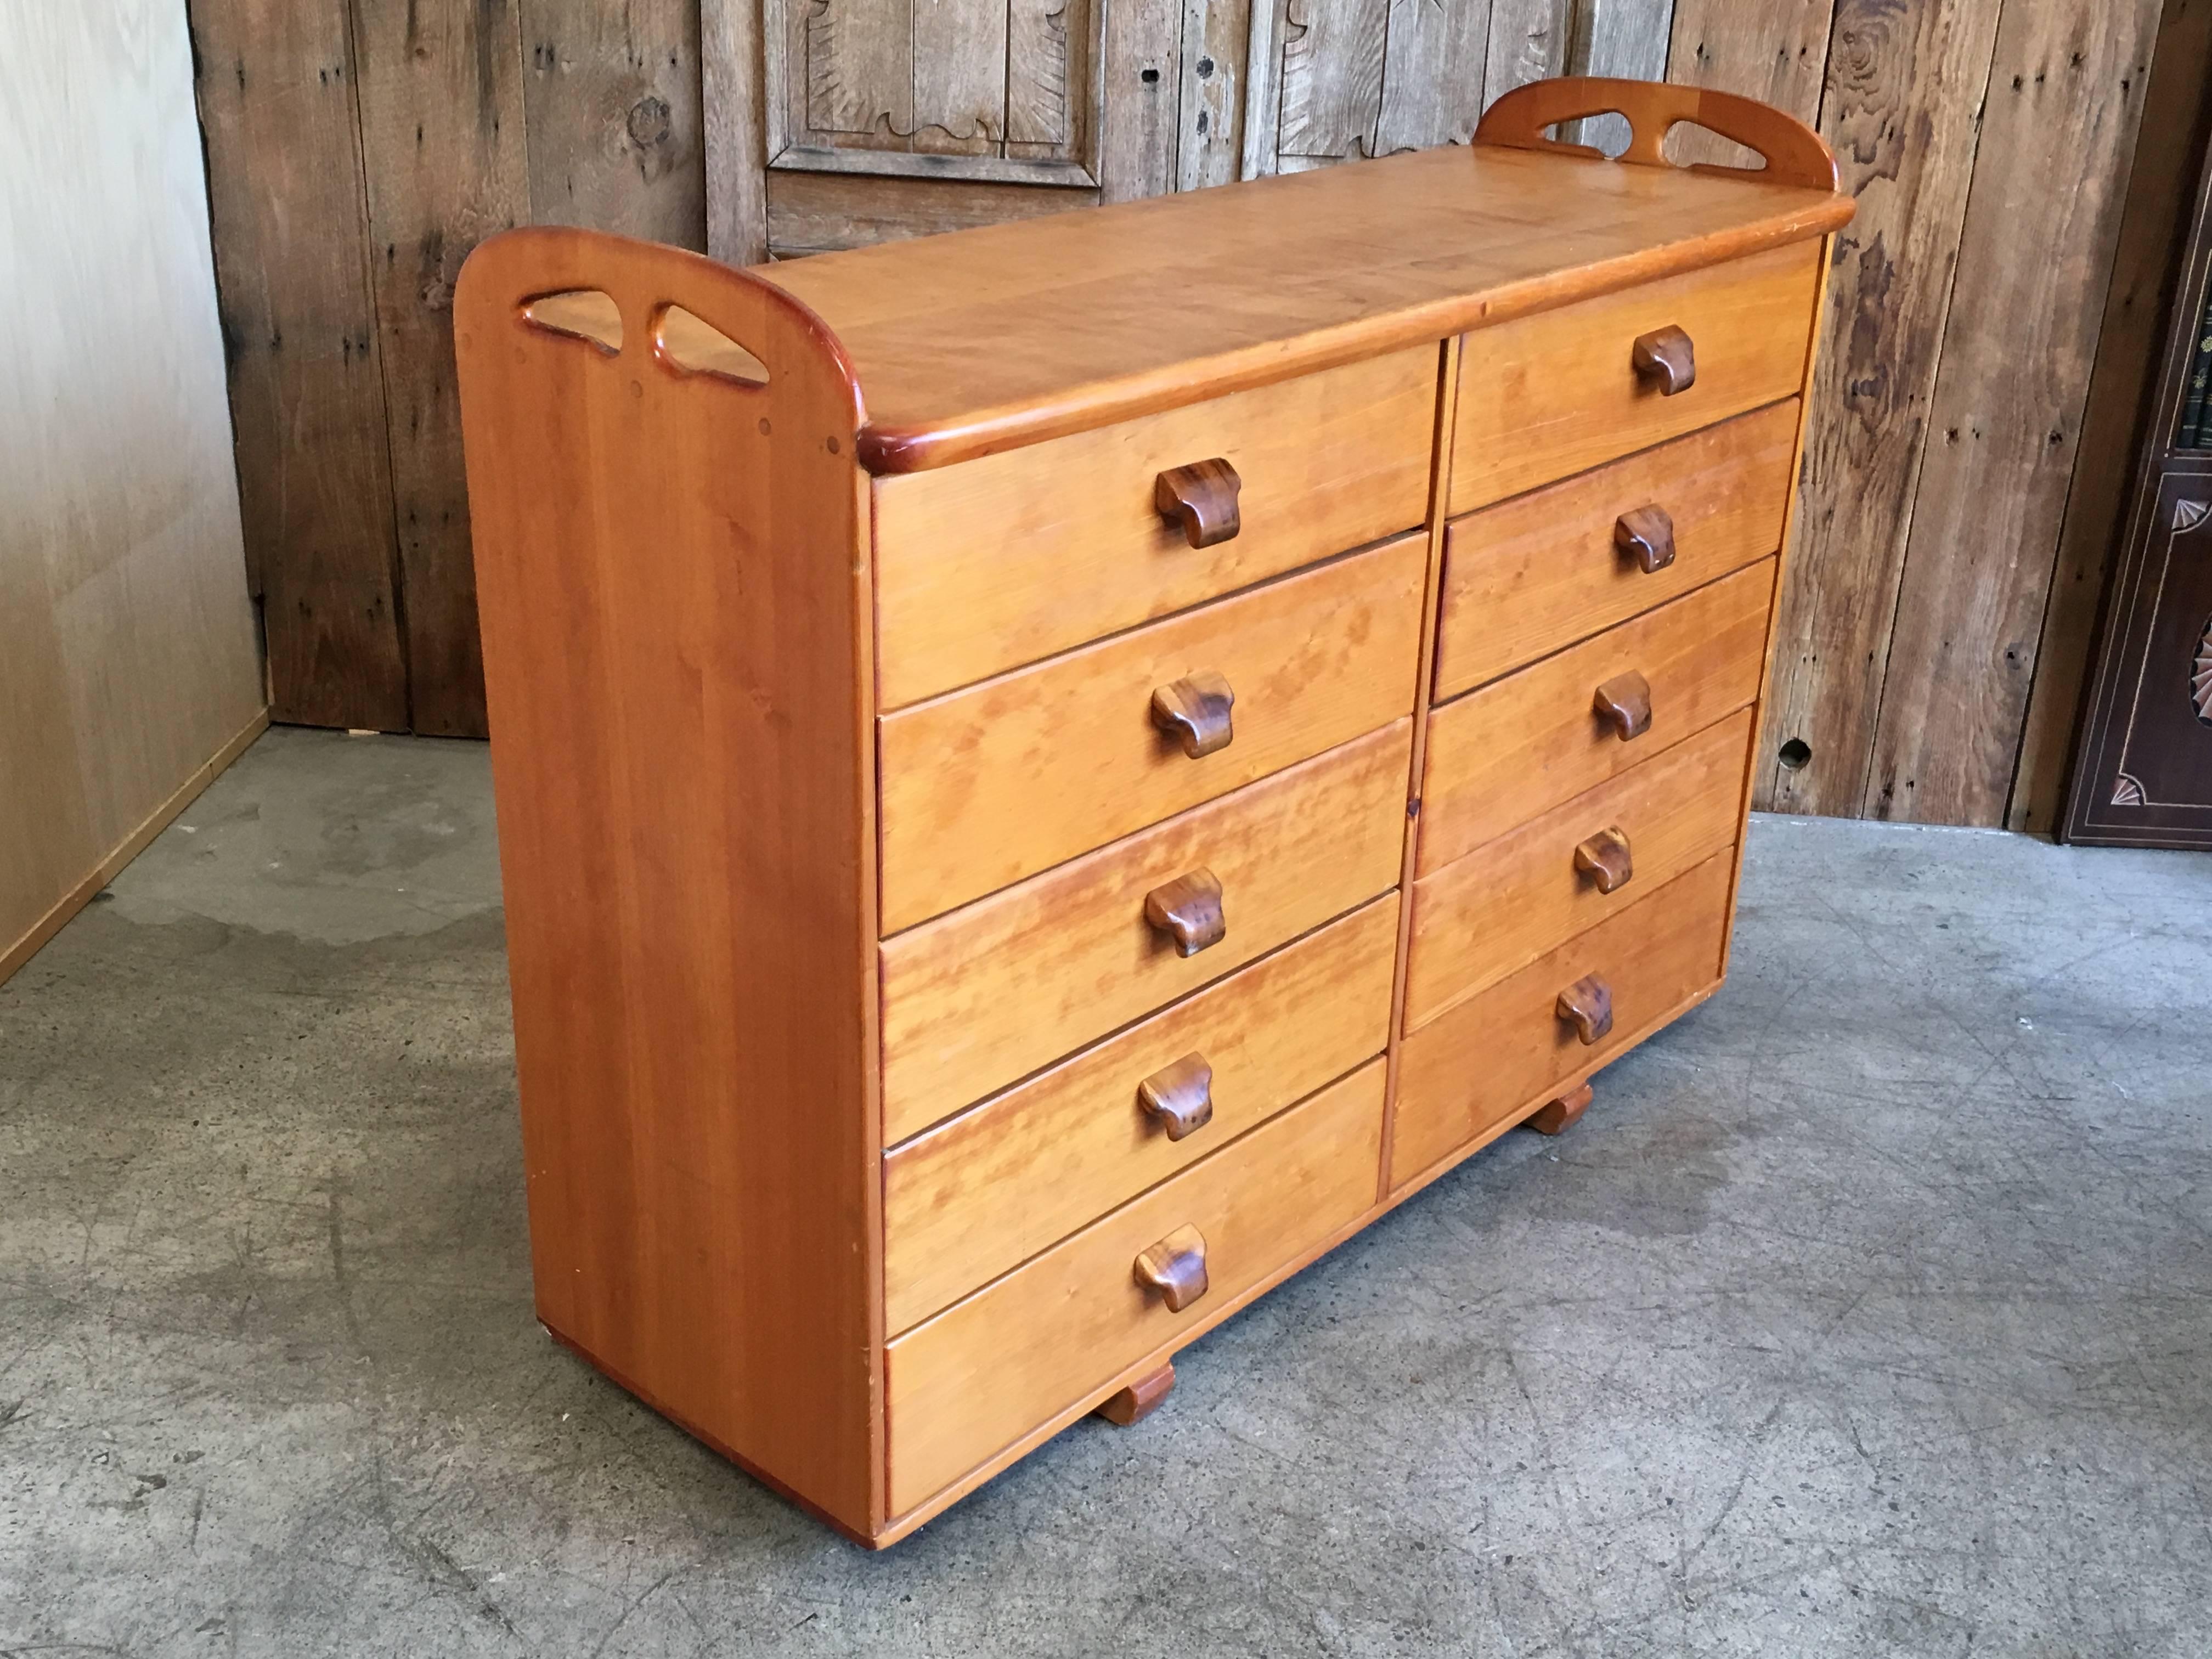 1970s ten-drawer dresser made of pine with koa wood handles with lots of storage it has a hippie coastal look.